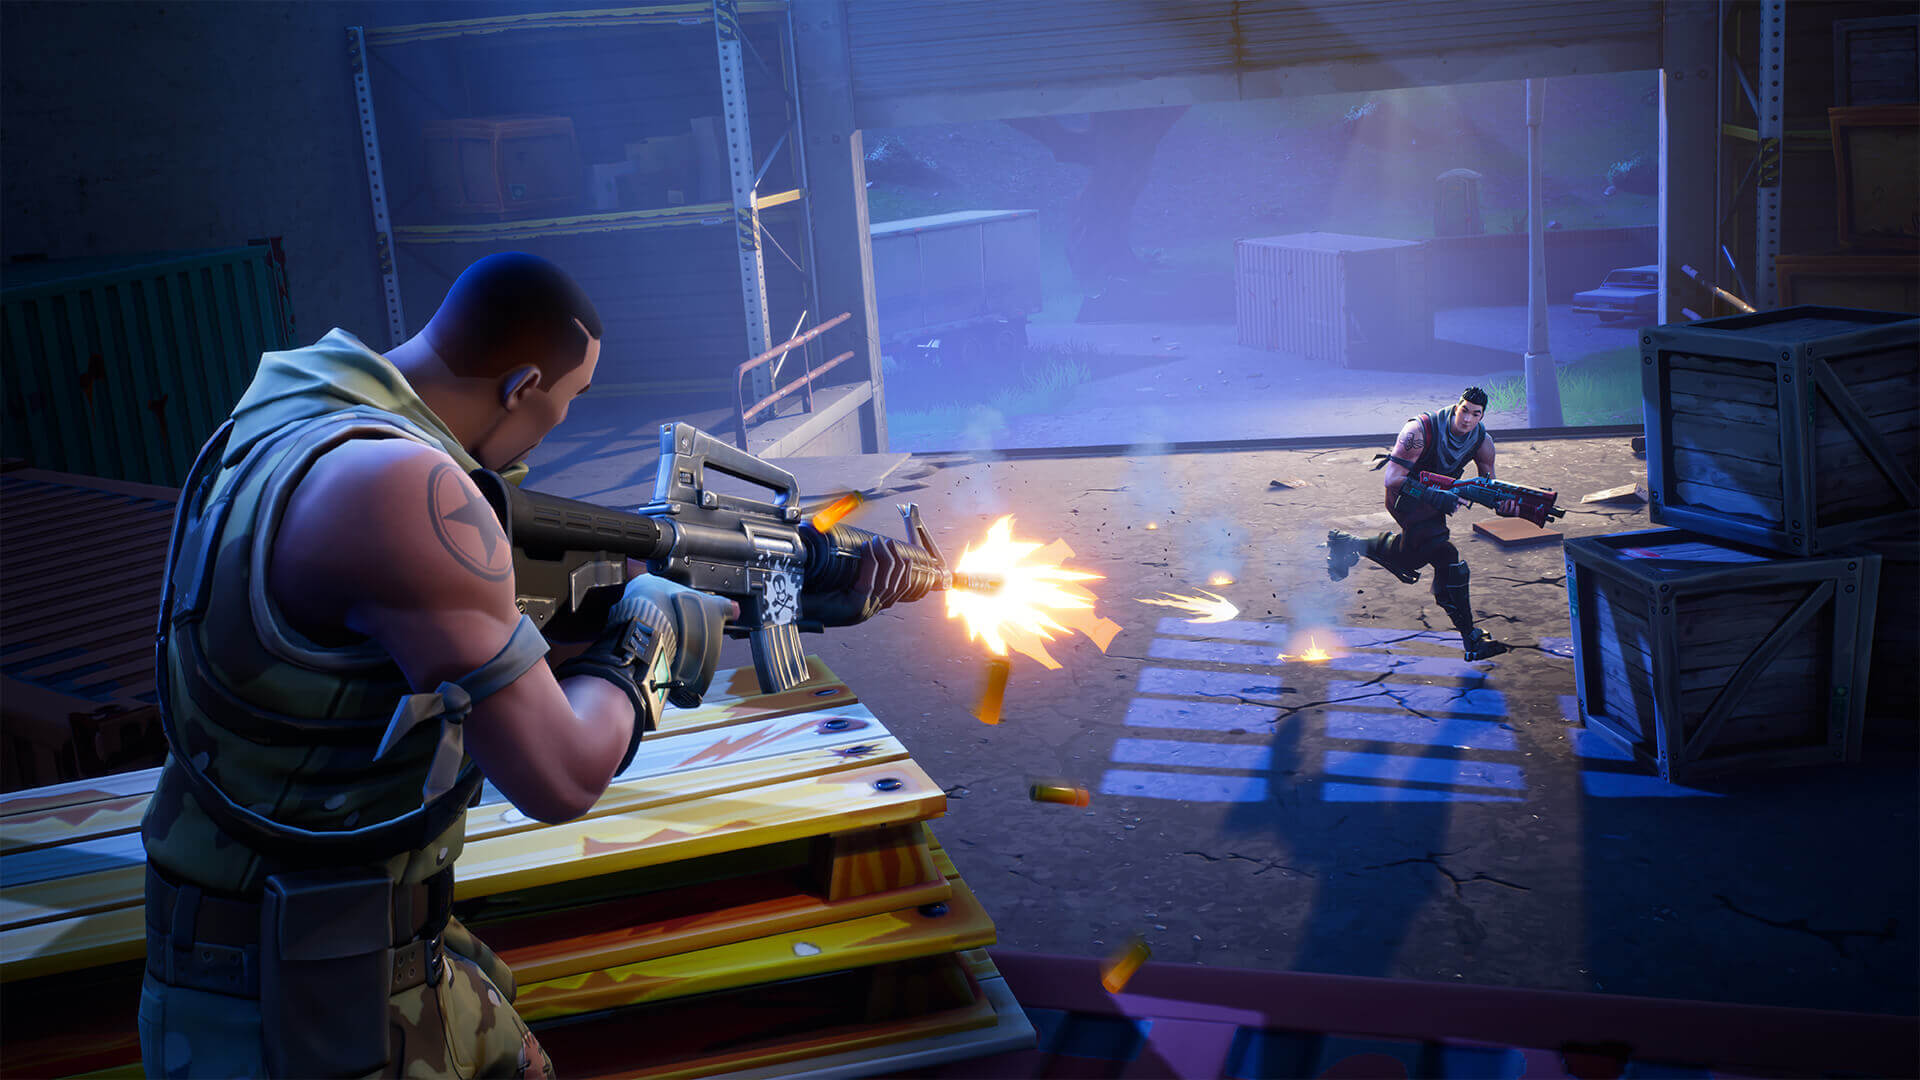 Leaks suggest Fortnite is heading to the Nintendo Switch